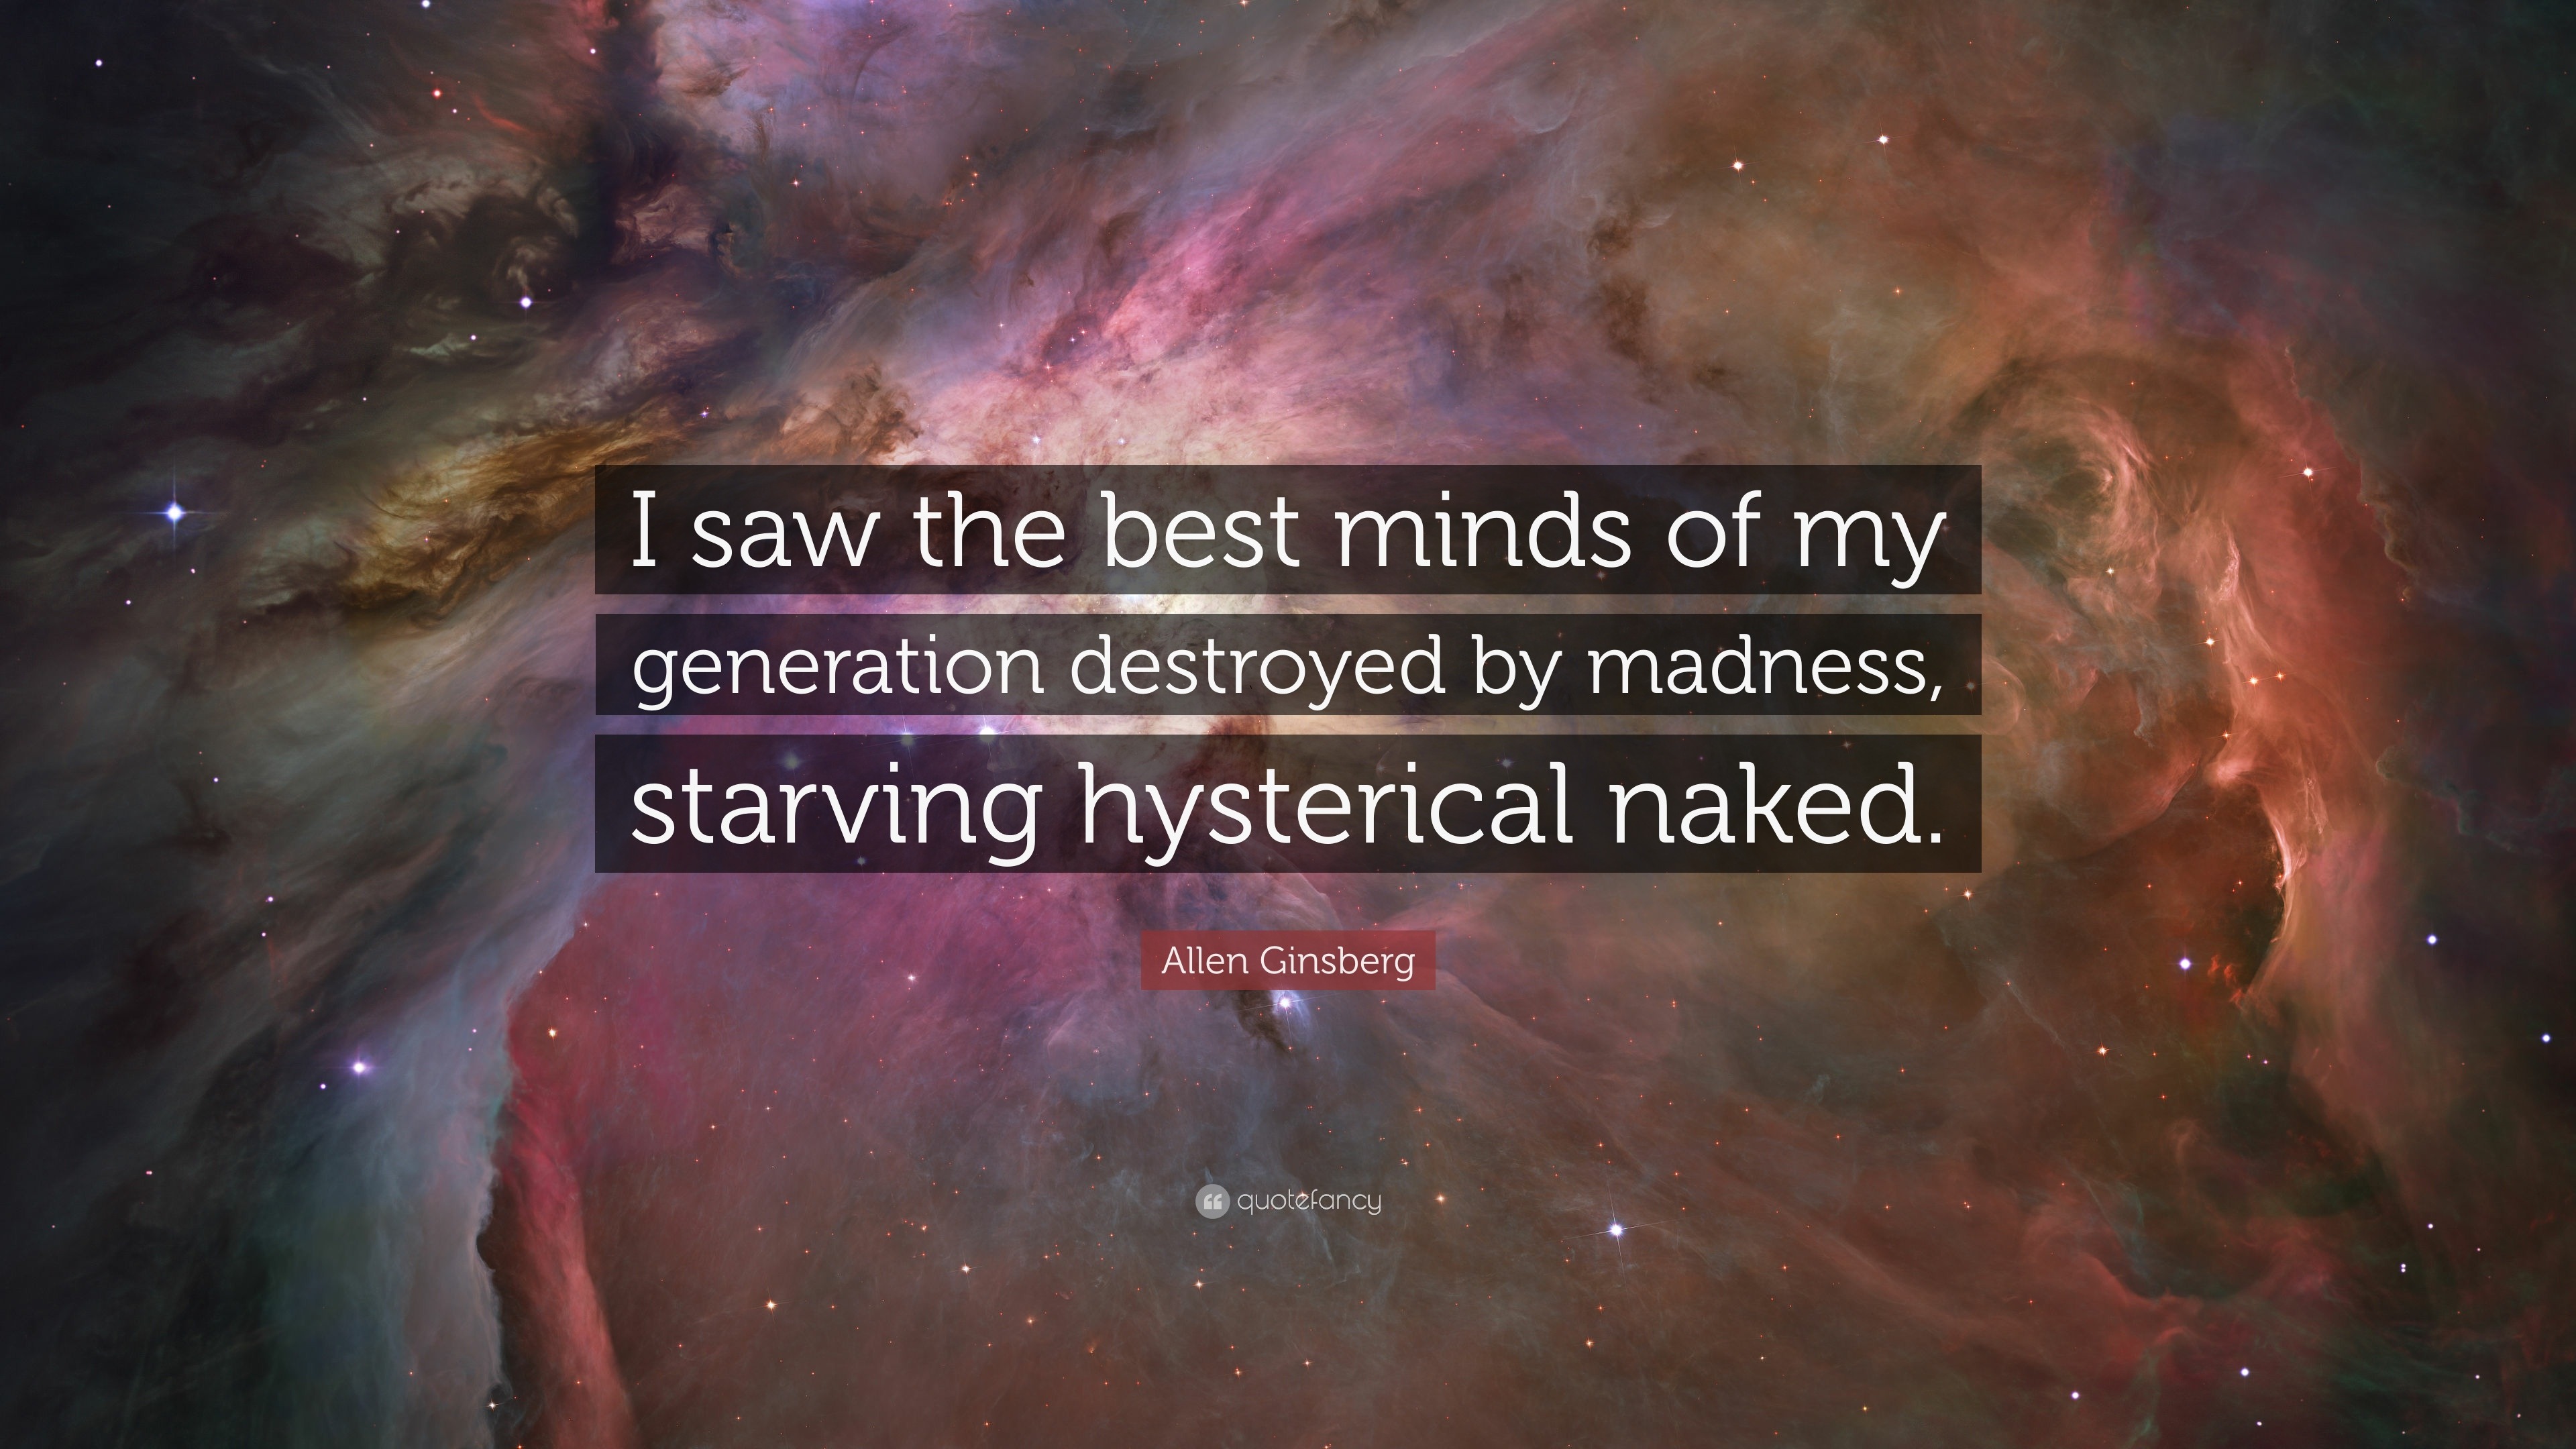 Allen Ginsberg Quote: “I saw the of my generation destroyed by madness, starving hysterical